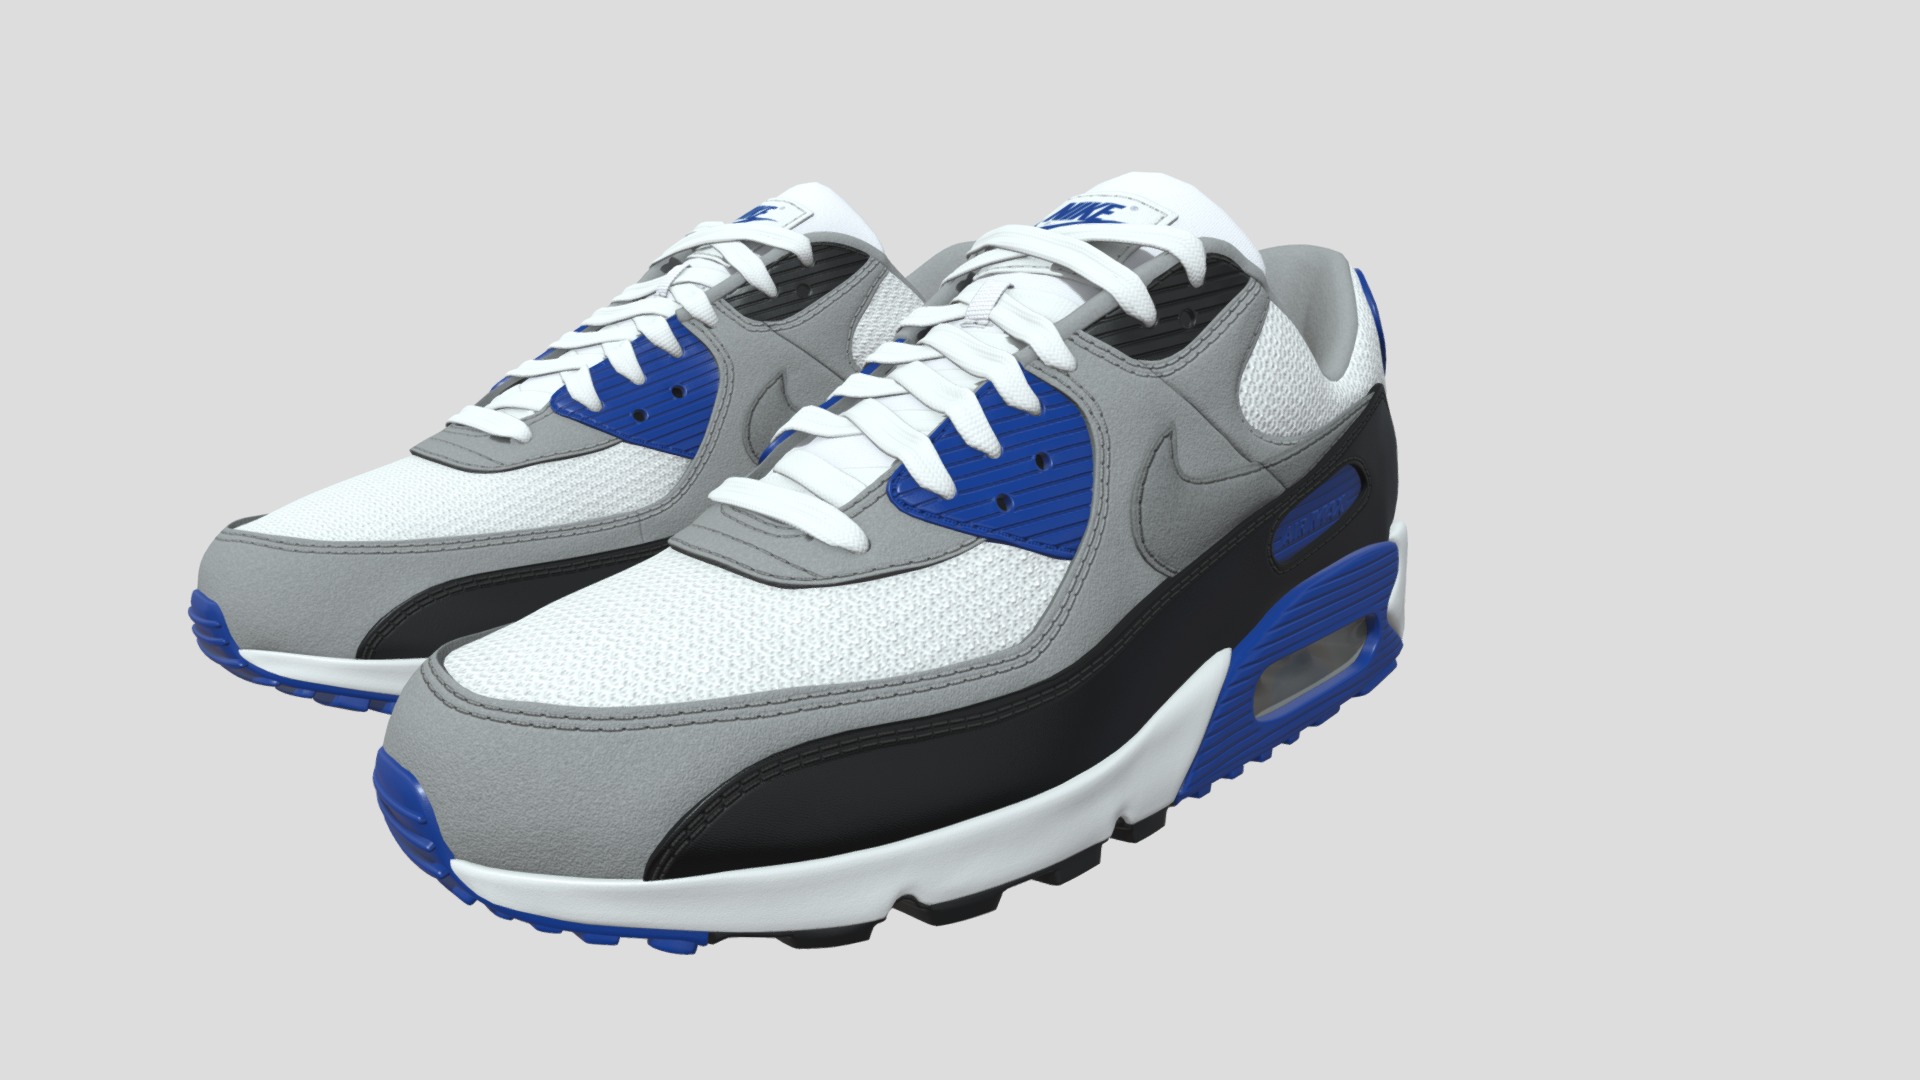 3D model Air Max 90 Nike - This is a 3D model of the Air Max 90 Nike. The 3D model is about a pair of blue and white sneakers.